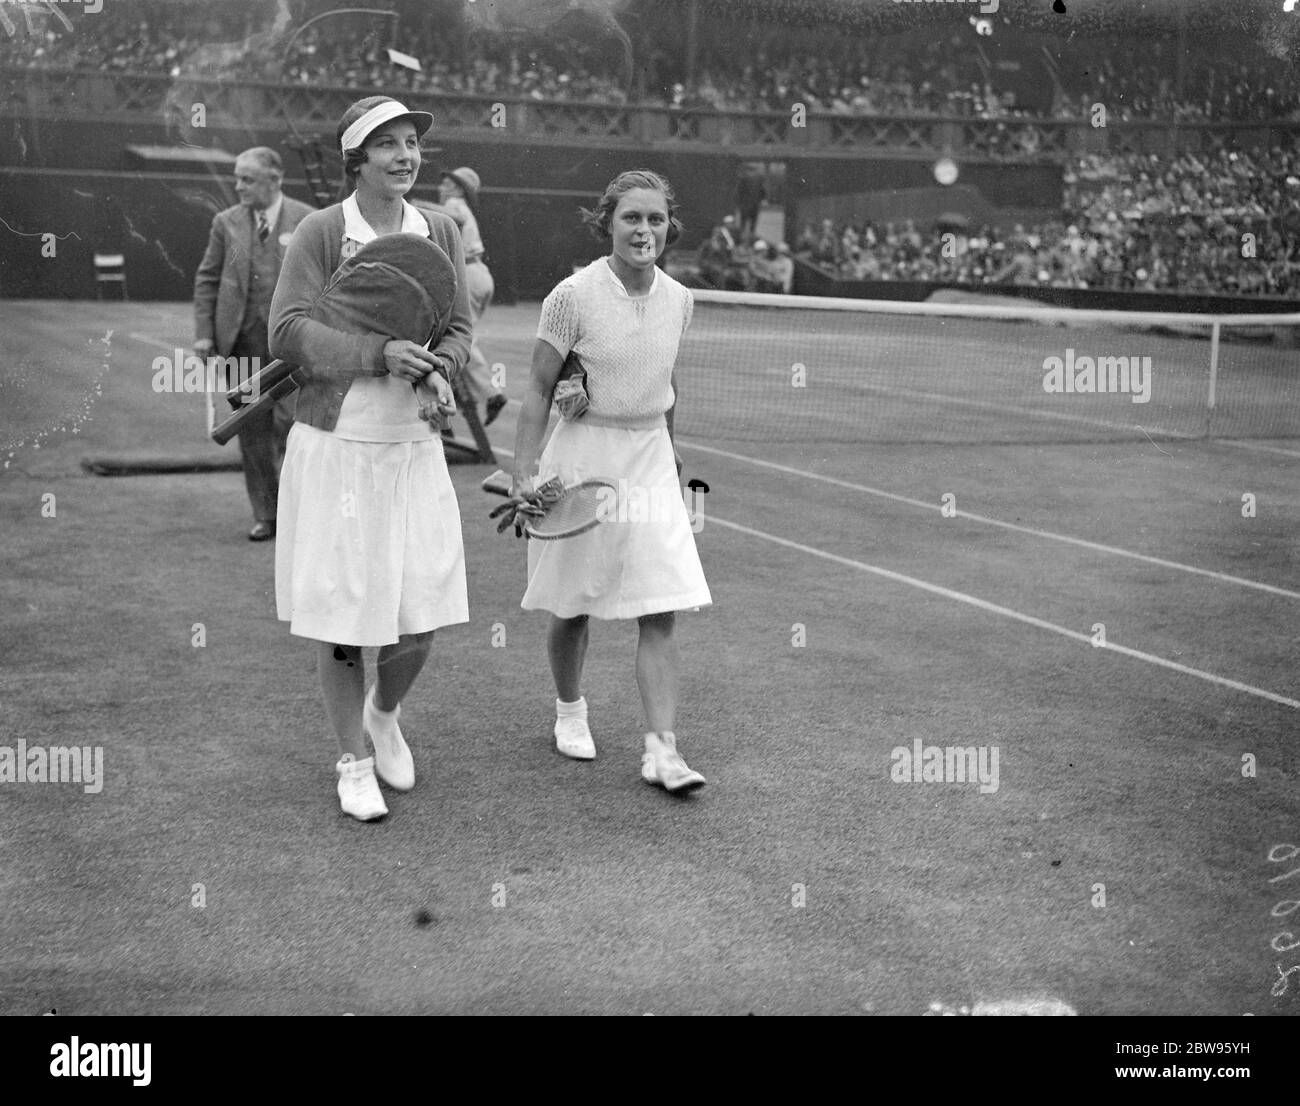 Helen Wills Moody defeats Mary Heeley in Wimbledon semi finals . Mrs Helen Wills Moody the American tennis star defeated Miss Mary Heeley the young Birmingham , England , girl in the semi finals of the womens singles in the Wimbledon tennis championships . Score was 6-2 , 6-0 . Mrs Wills Moody and Miss Mary Heeley walking off the court after the match . 30 June 1932 Stock Photo